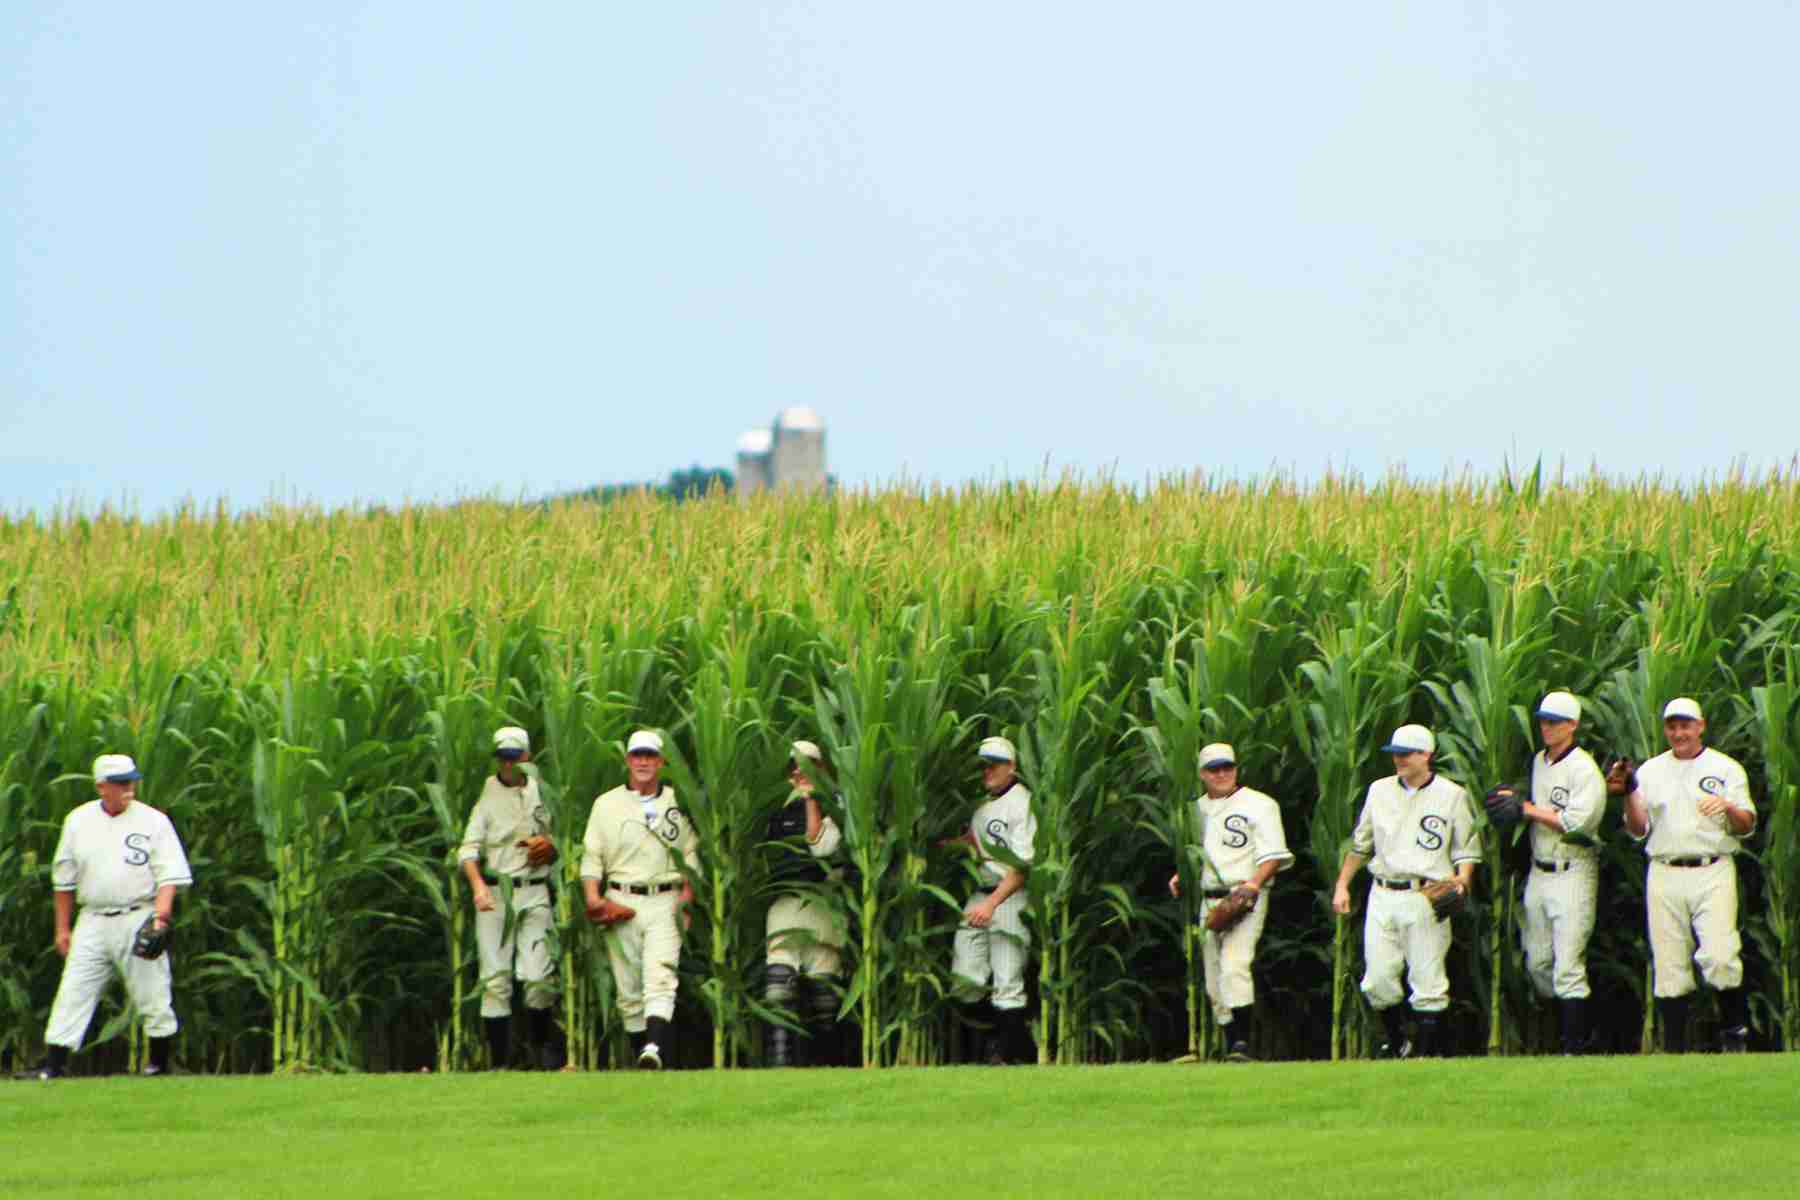 MLB Confirms Field of Dreams Game Pushed to 2021 – KCHA News